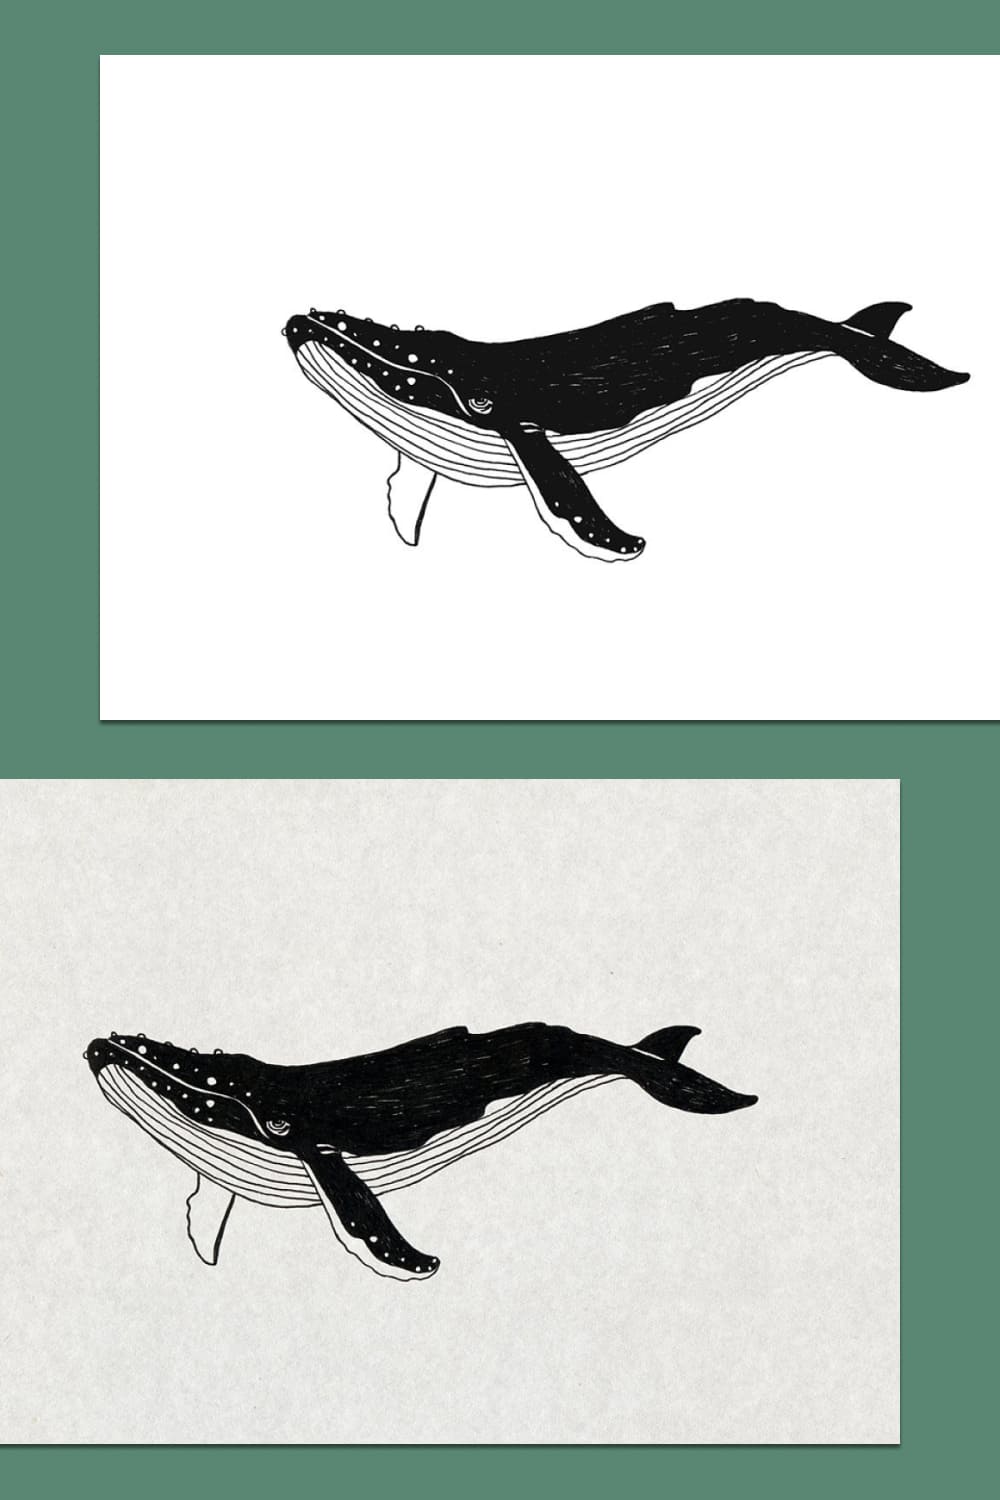 whale illustration and backgrounds for your ideas.